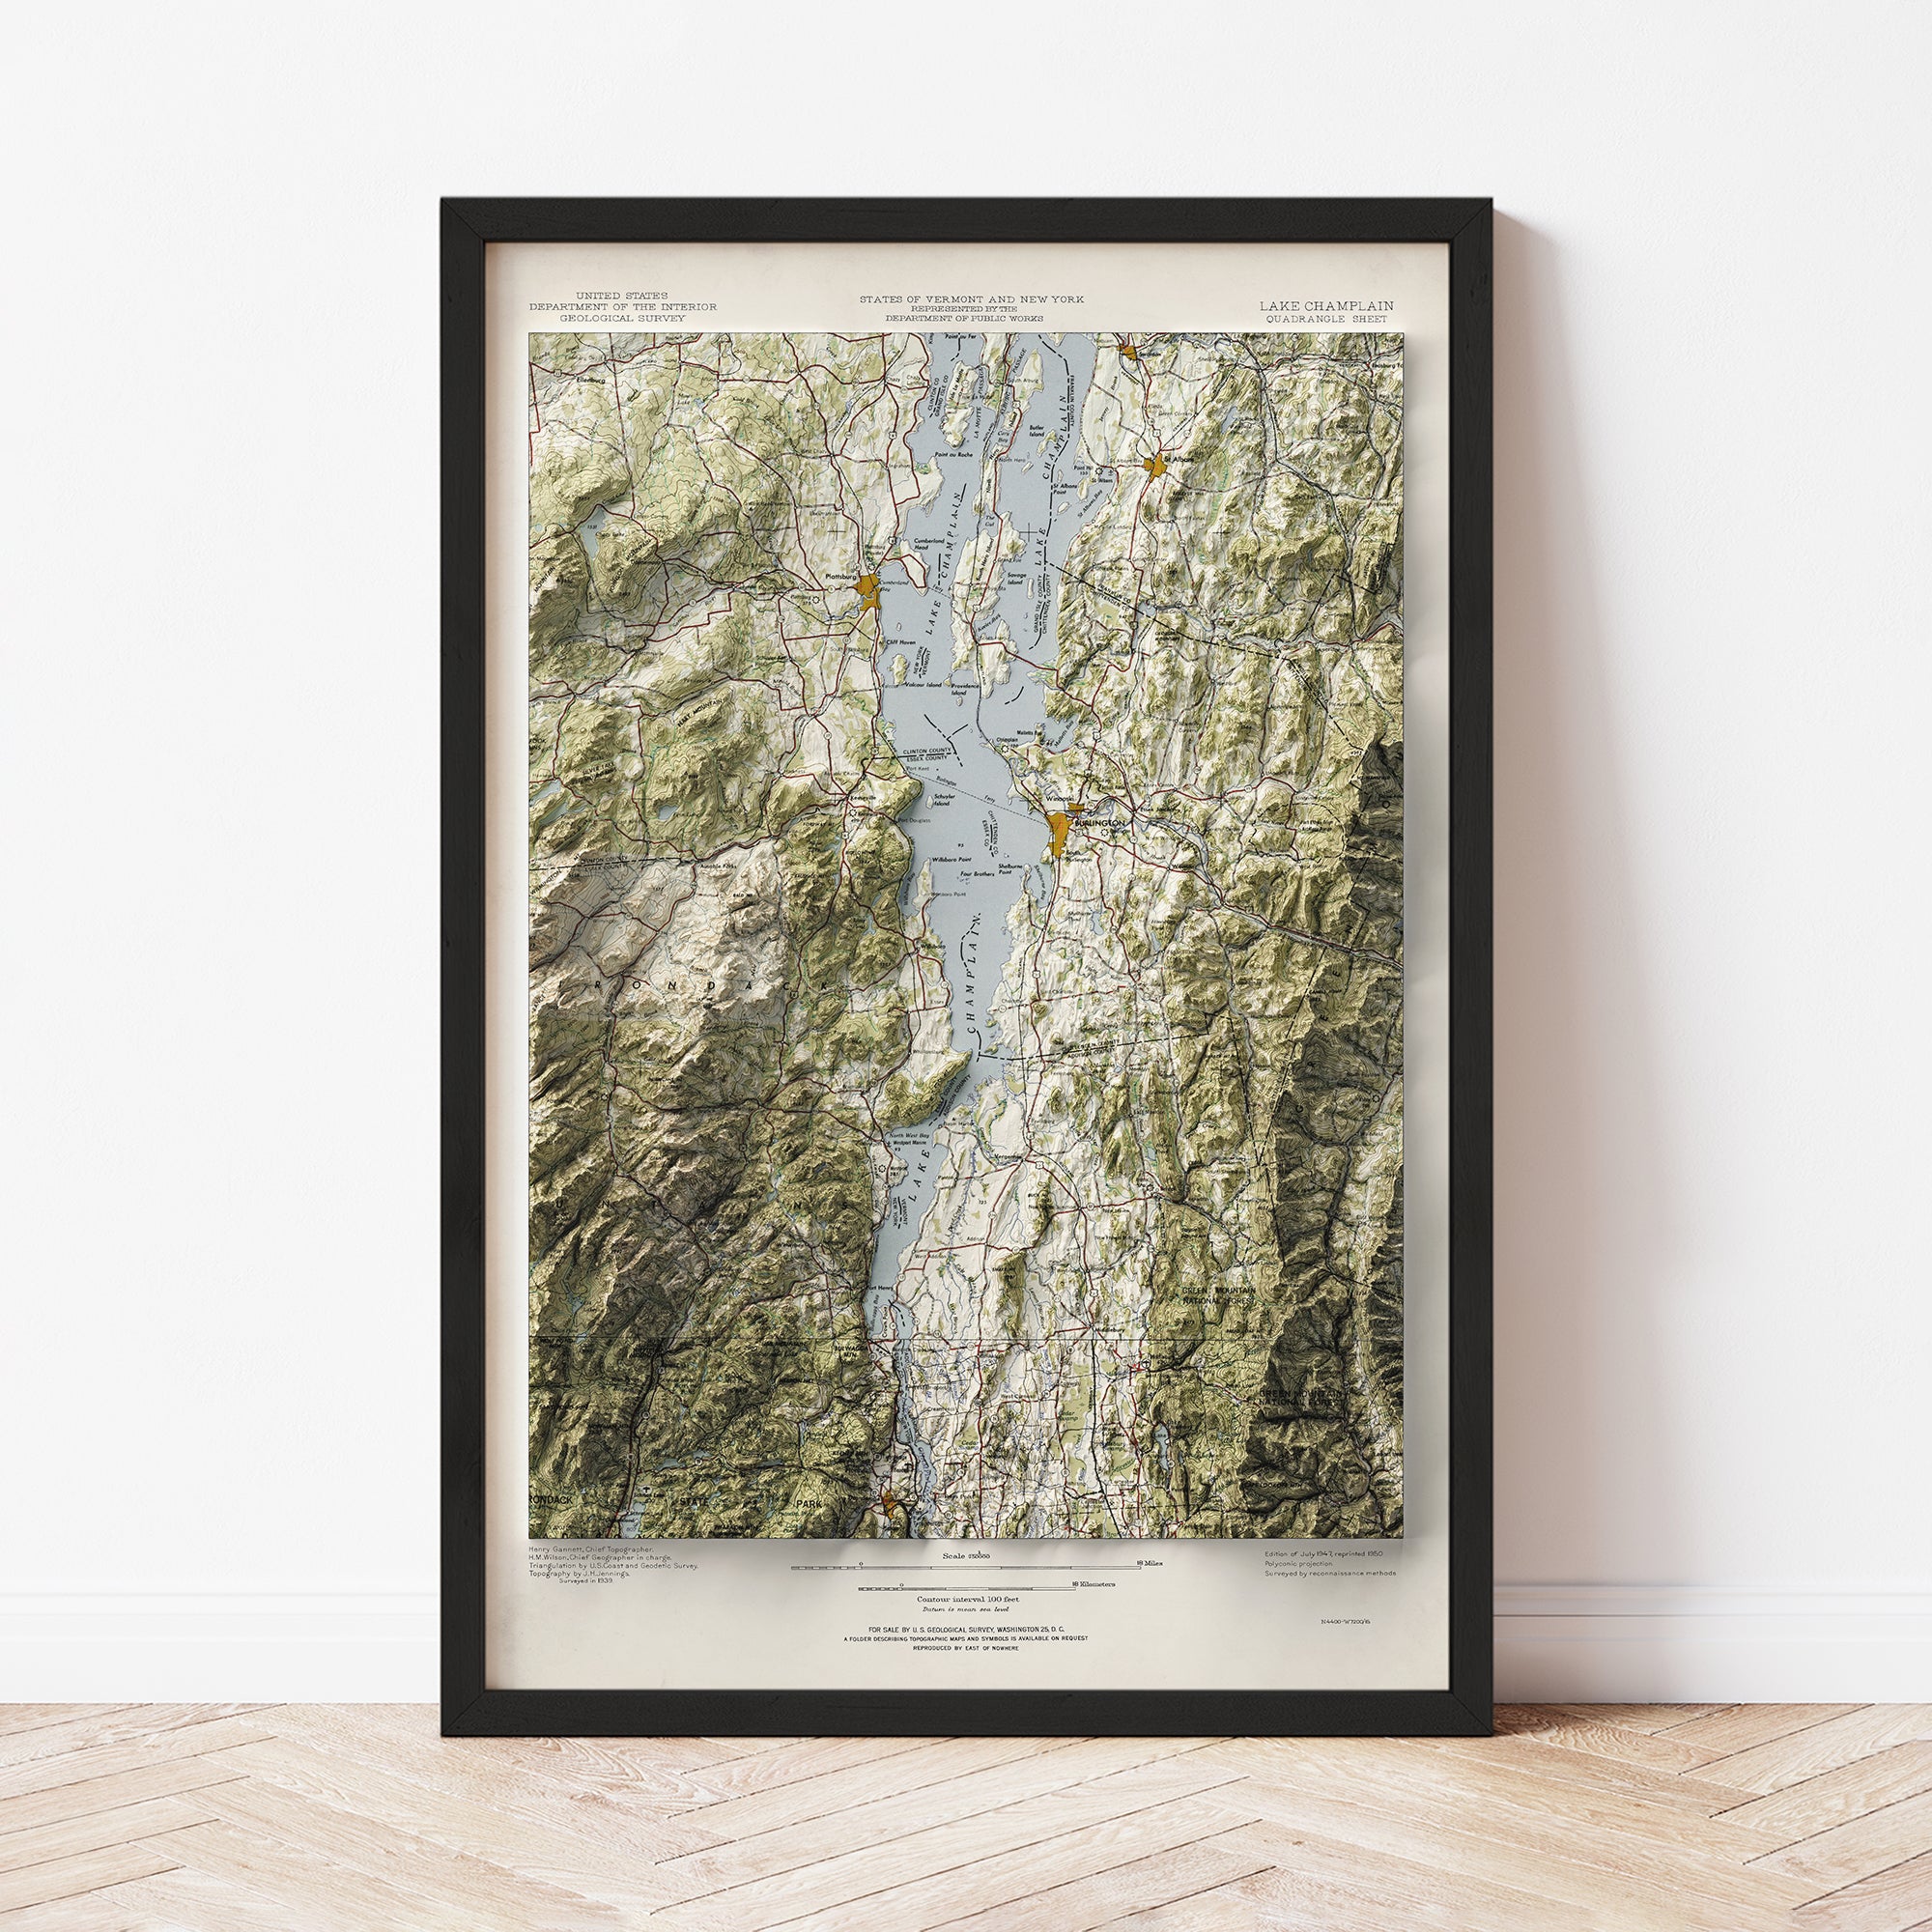 Lake Champlain - Vintage Shaded Relief Map (1947)